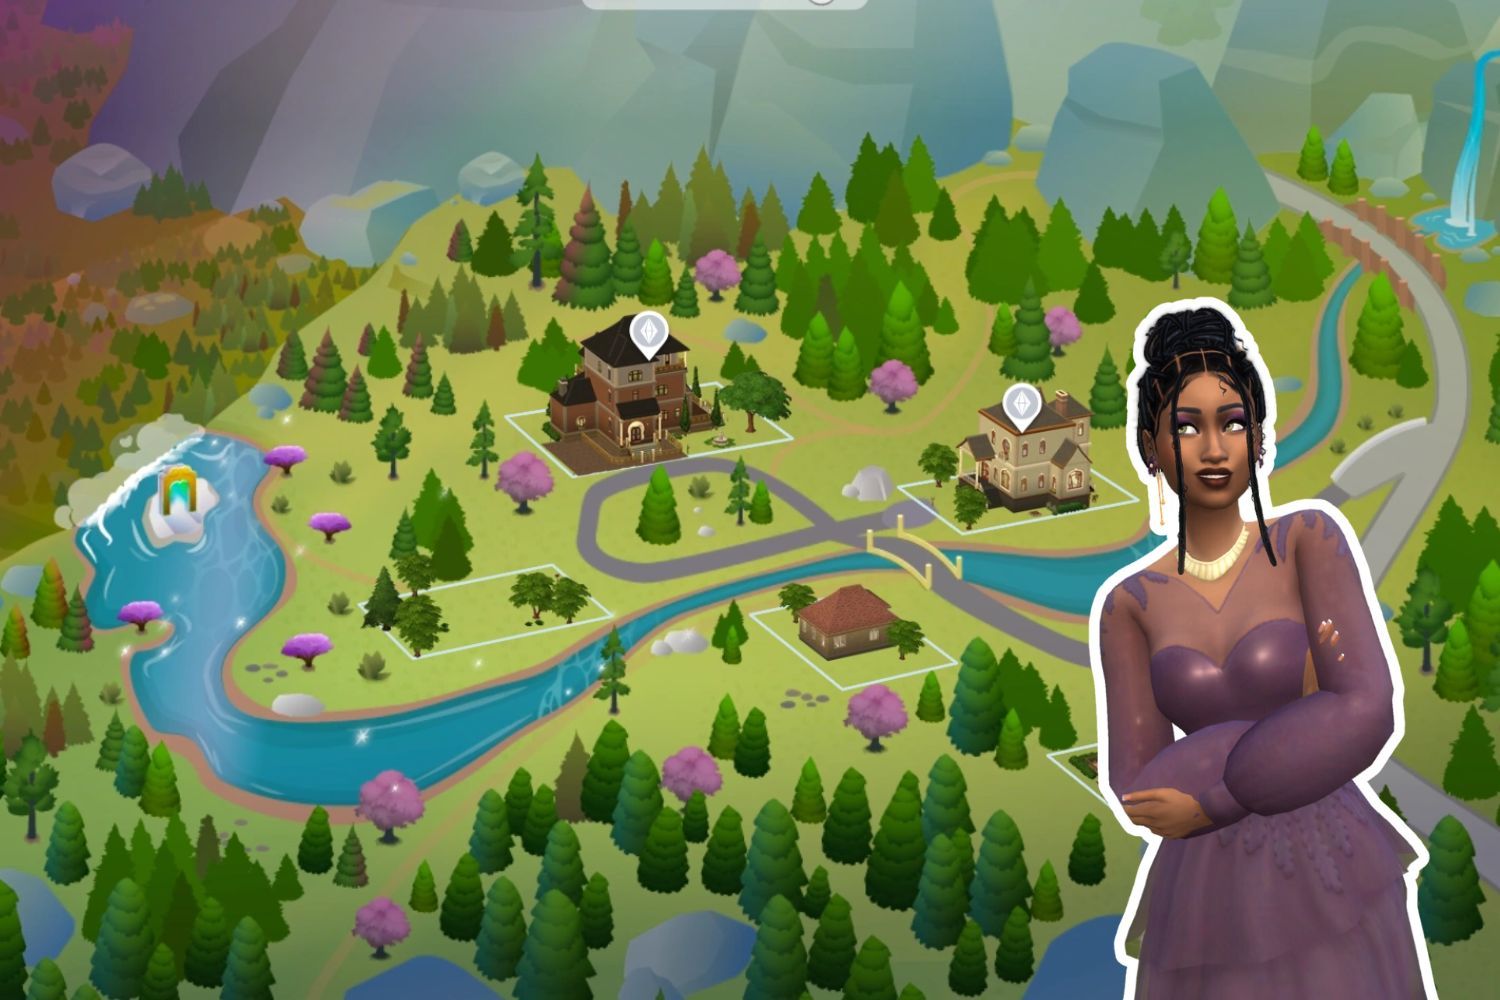 In a whimsical dress, the feminine Sim looks up at a map of Glimmerbrook.